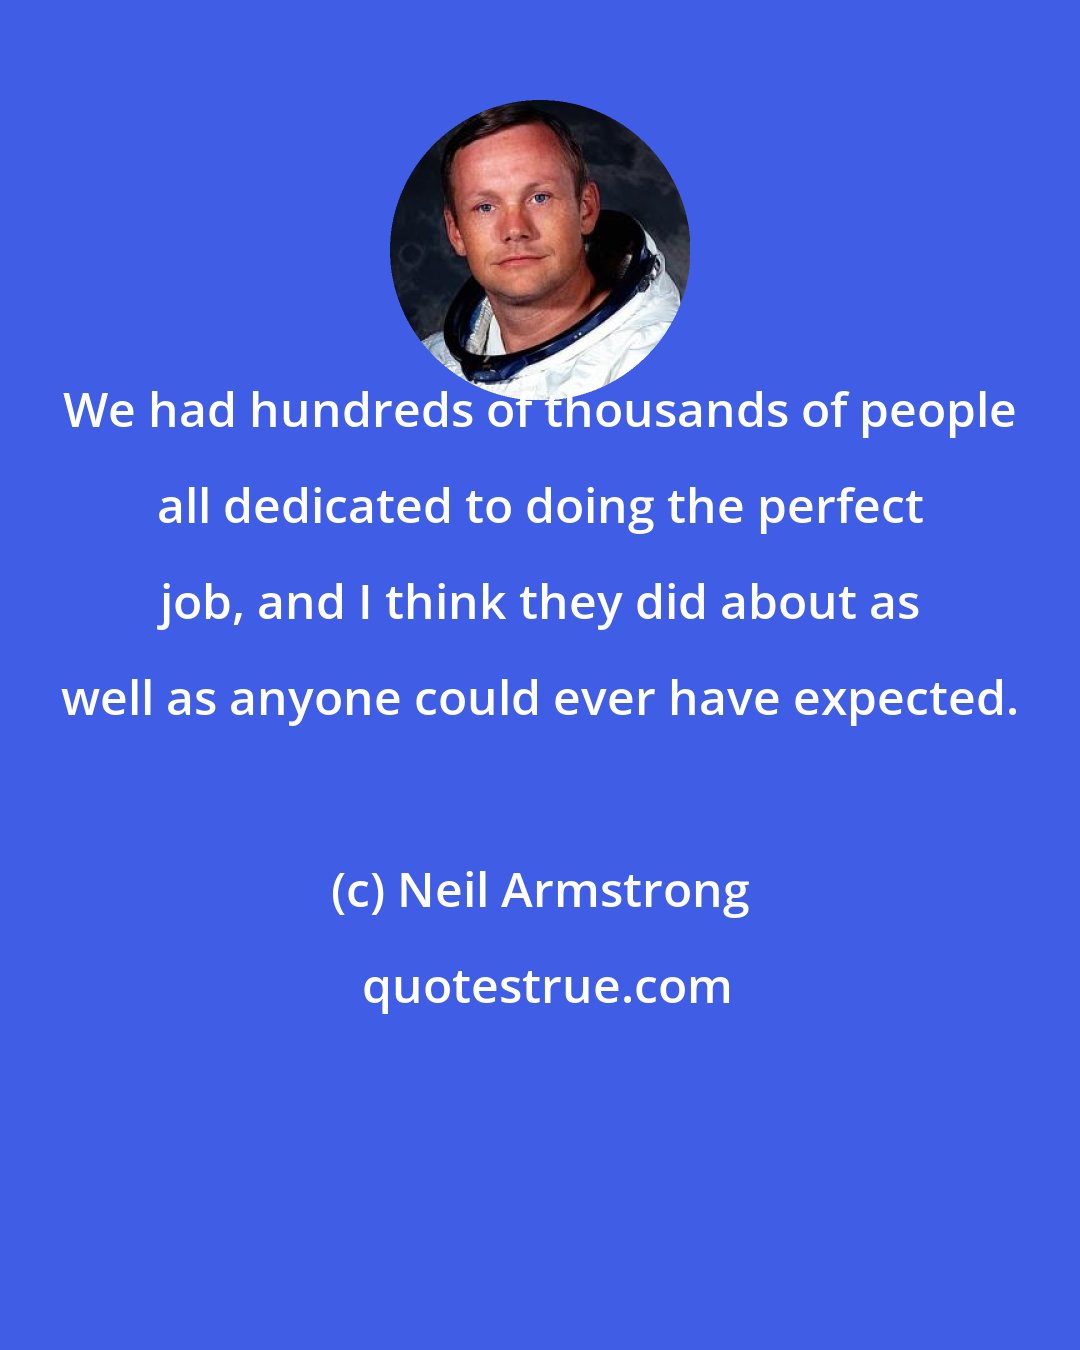 Neil Armstrong: We had hundreds of thousands of people all dedicated to doing the perfect job, and I think they did about as well as anyone could ever have expected.